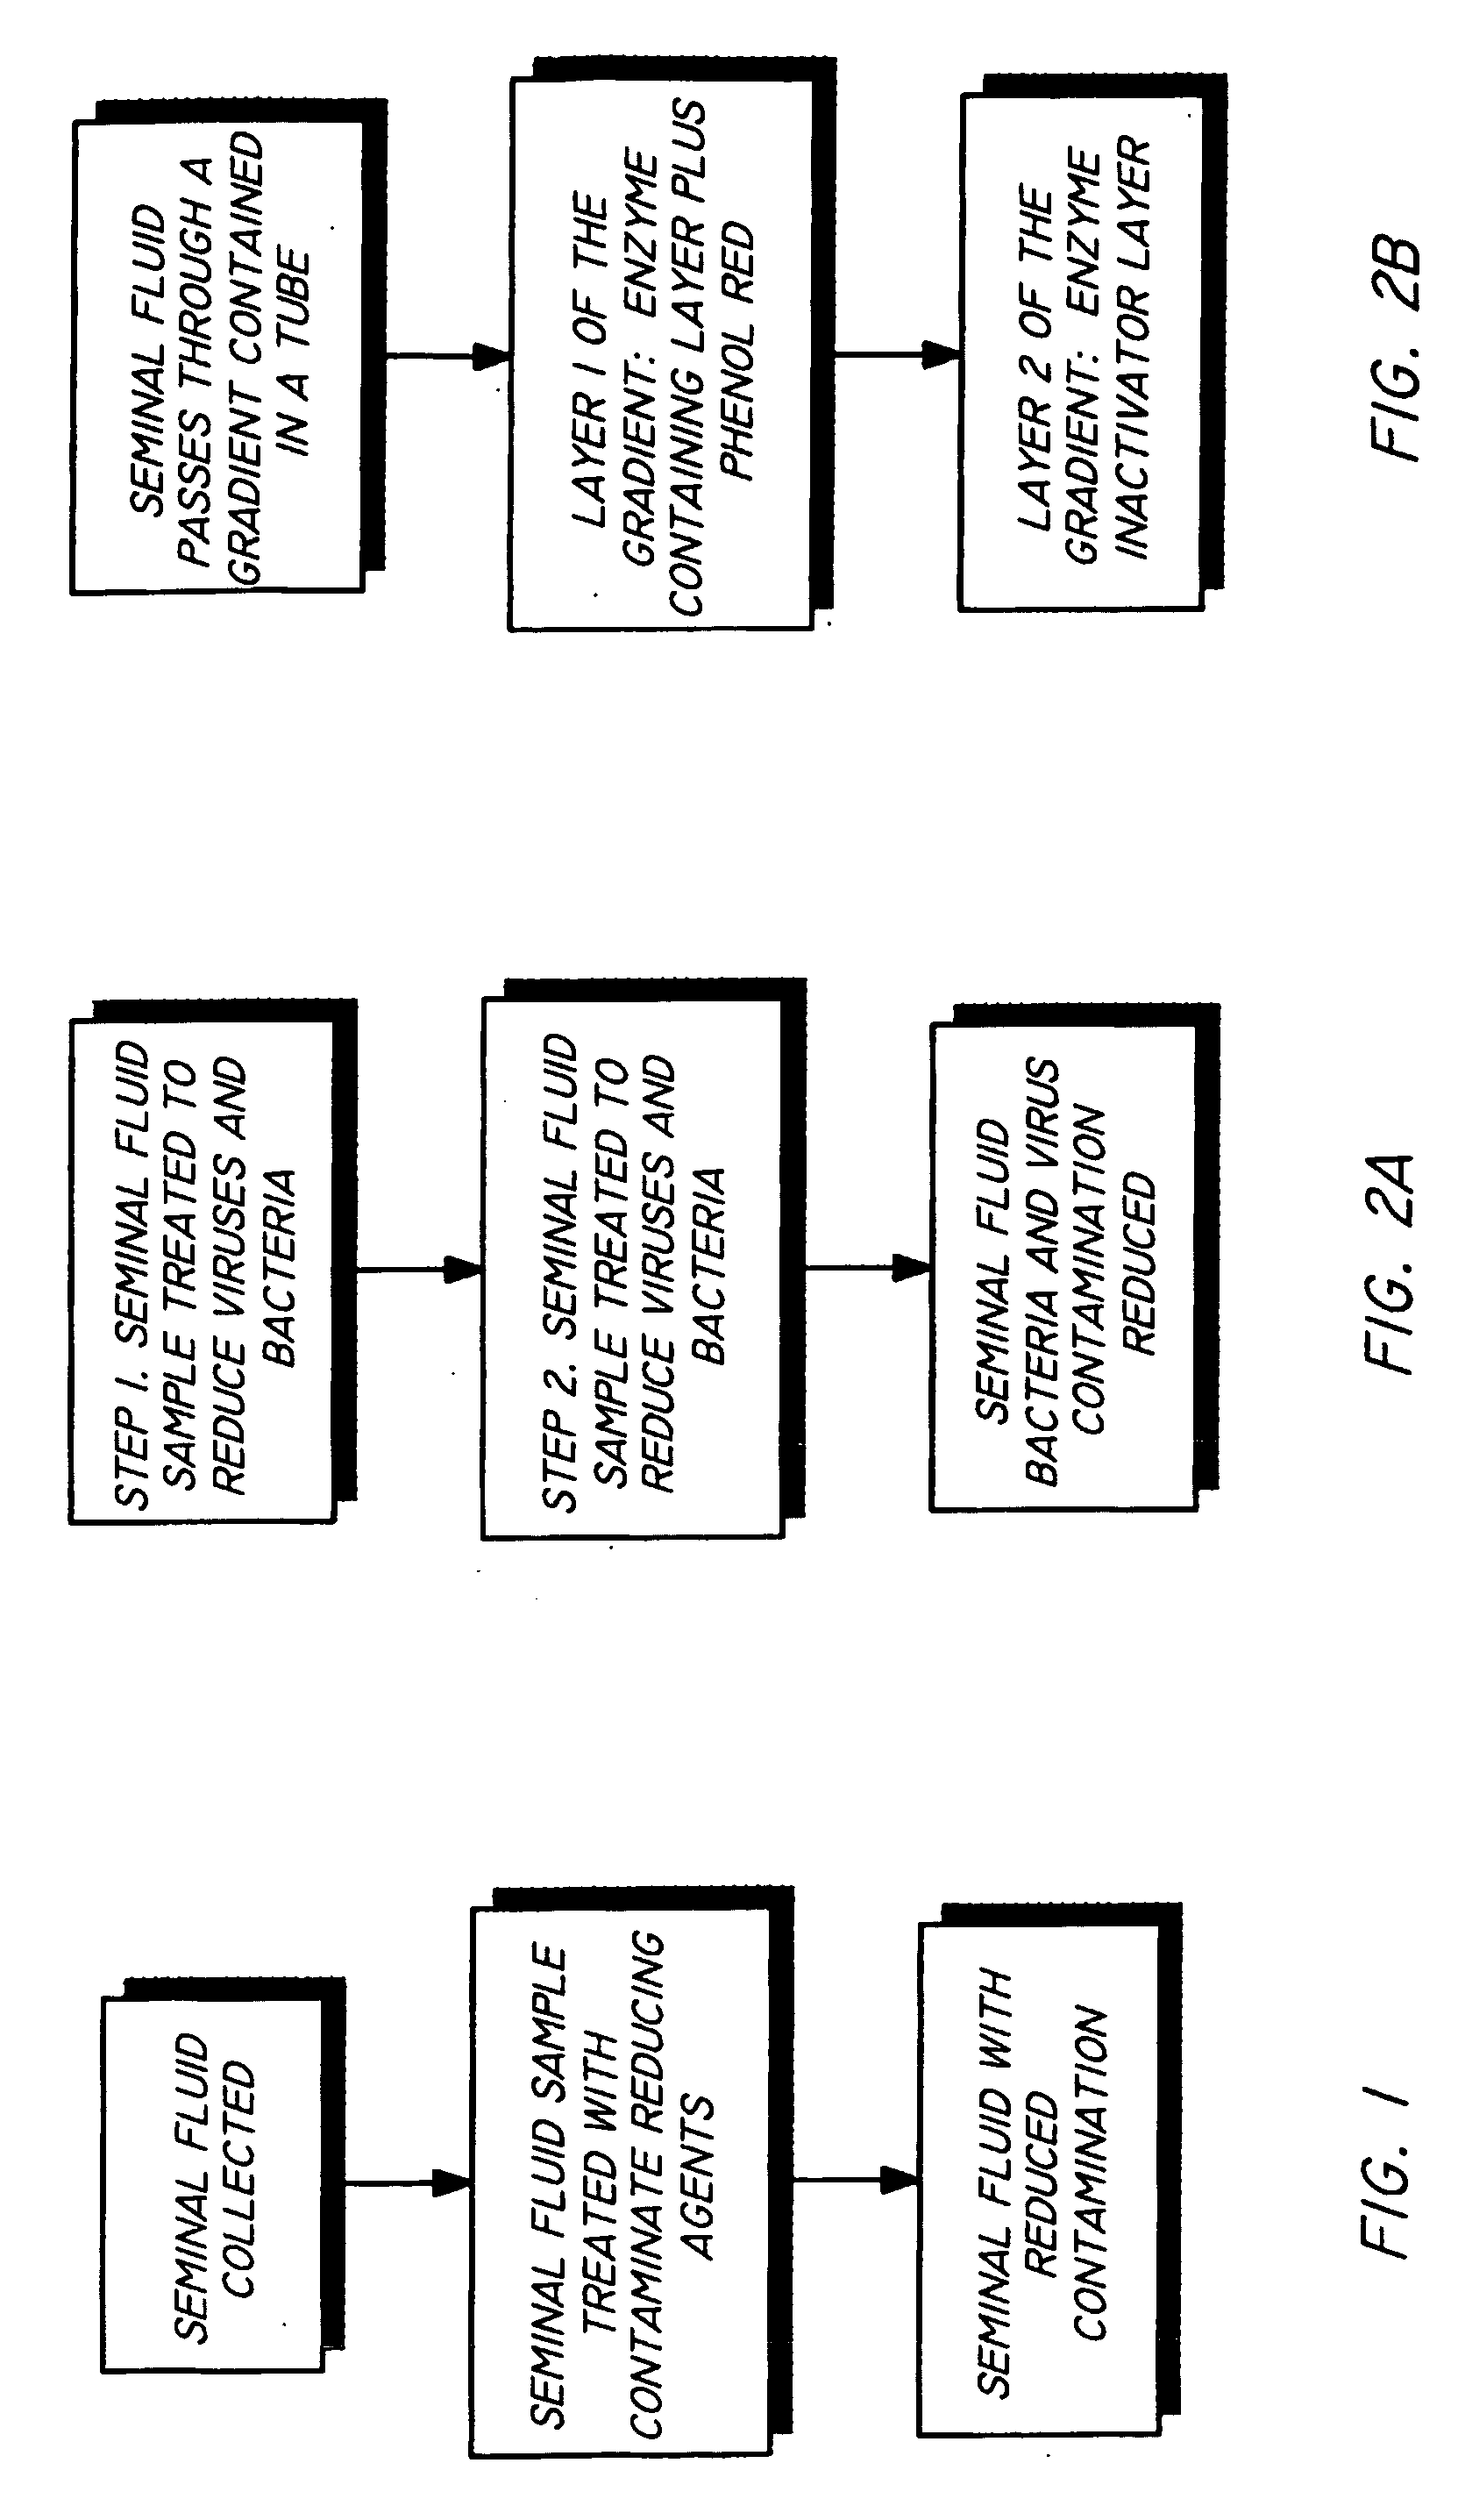 Method and apparatus for reducing pathogens in a biological sample